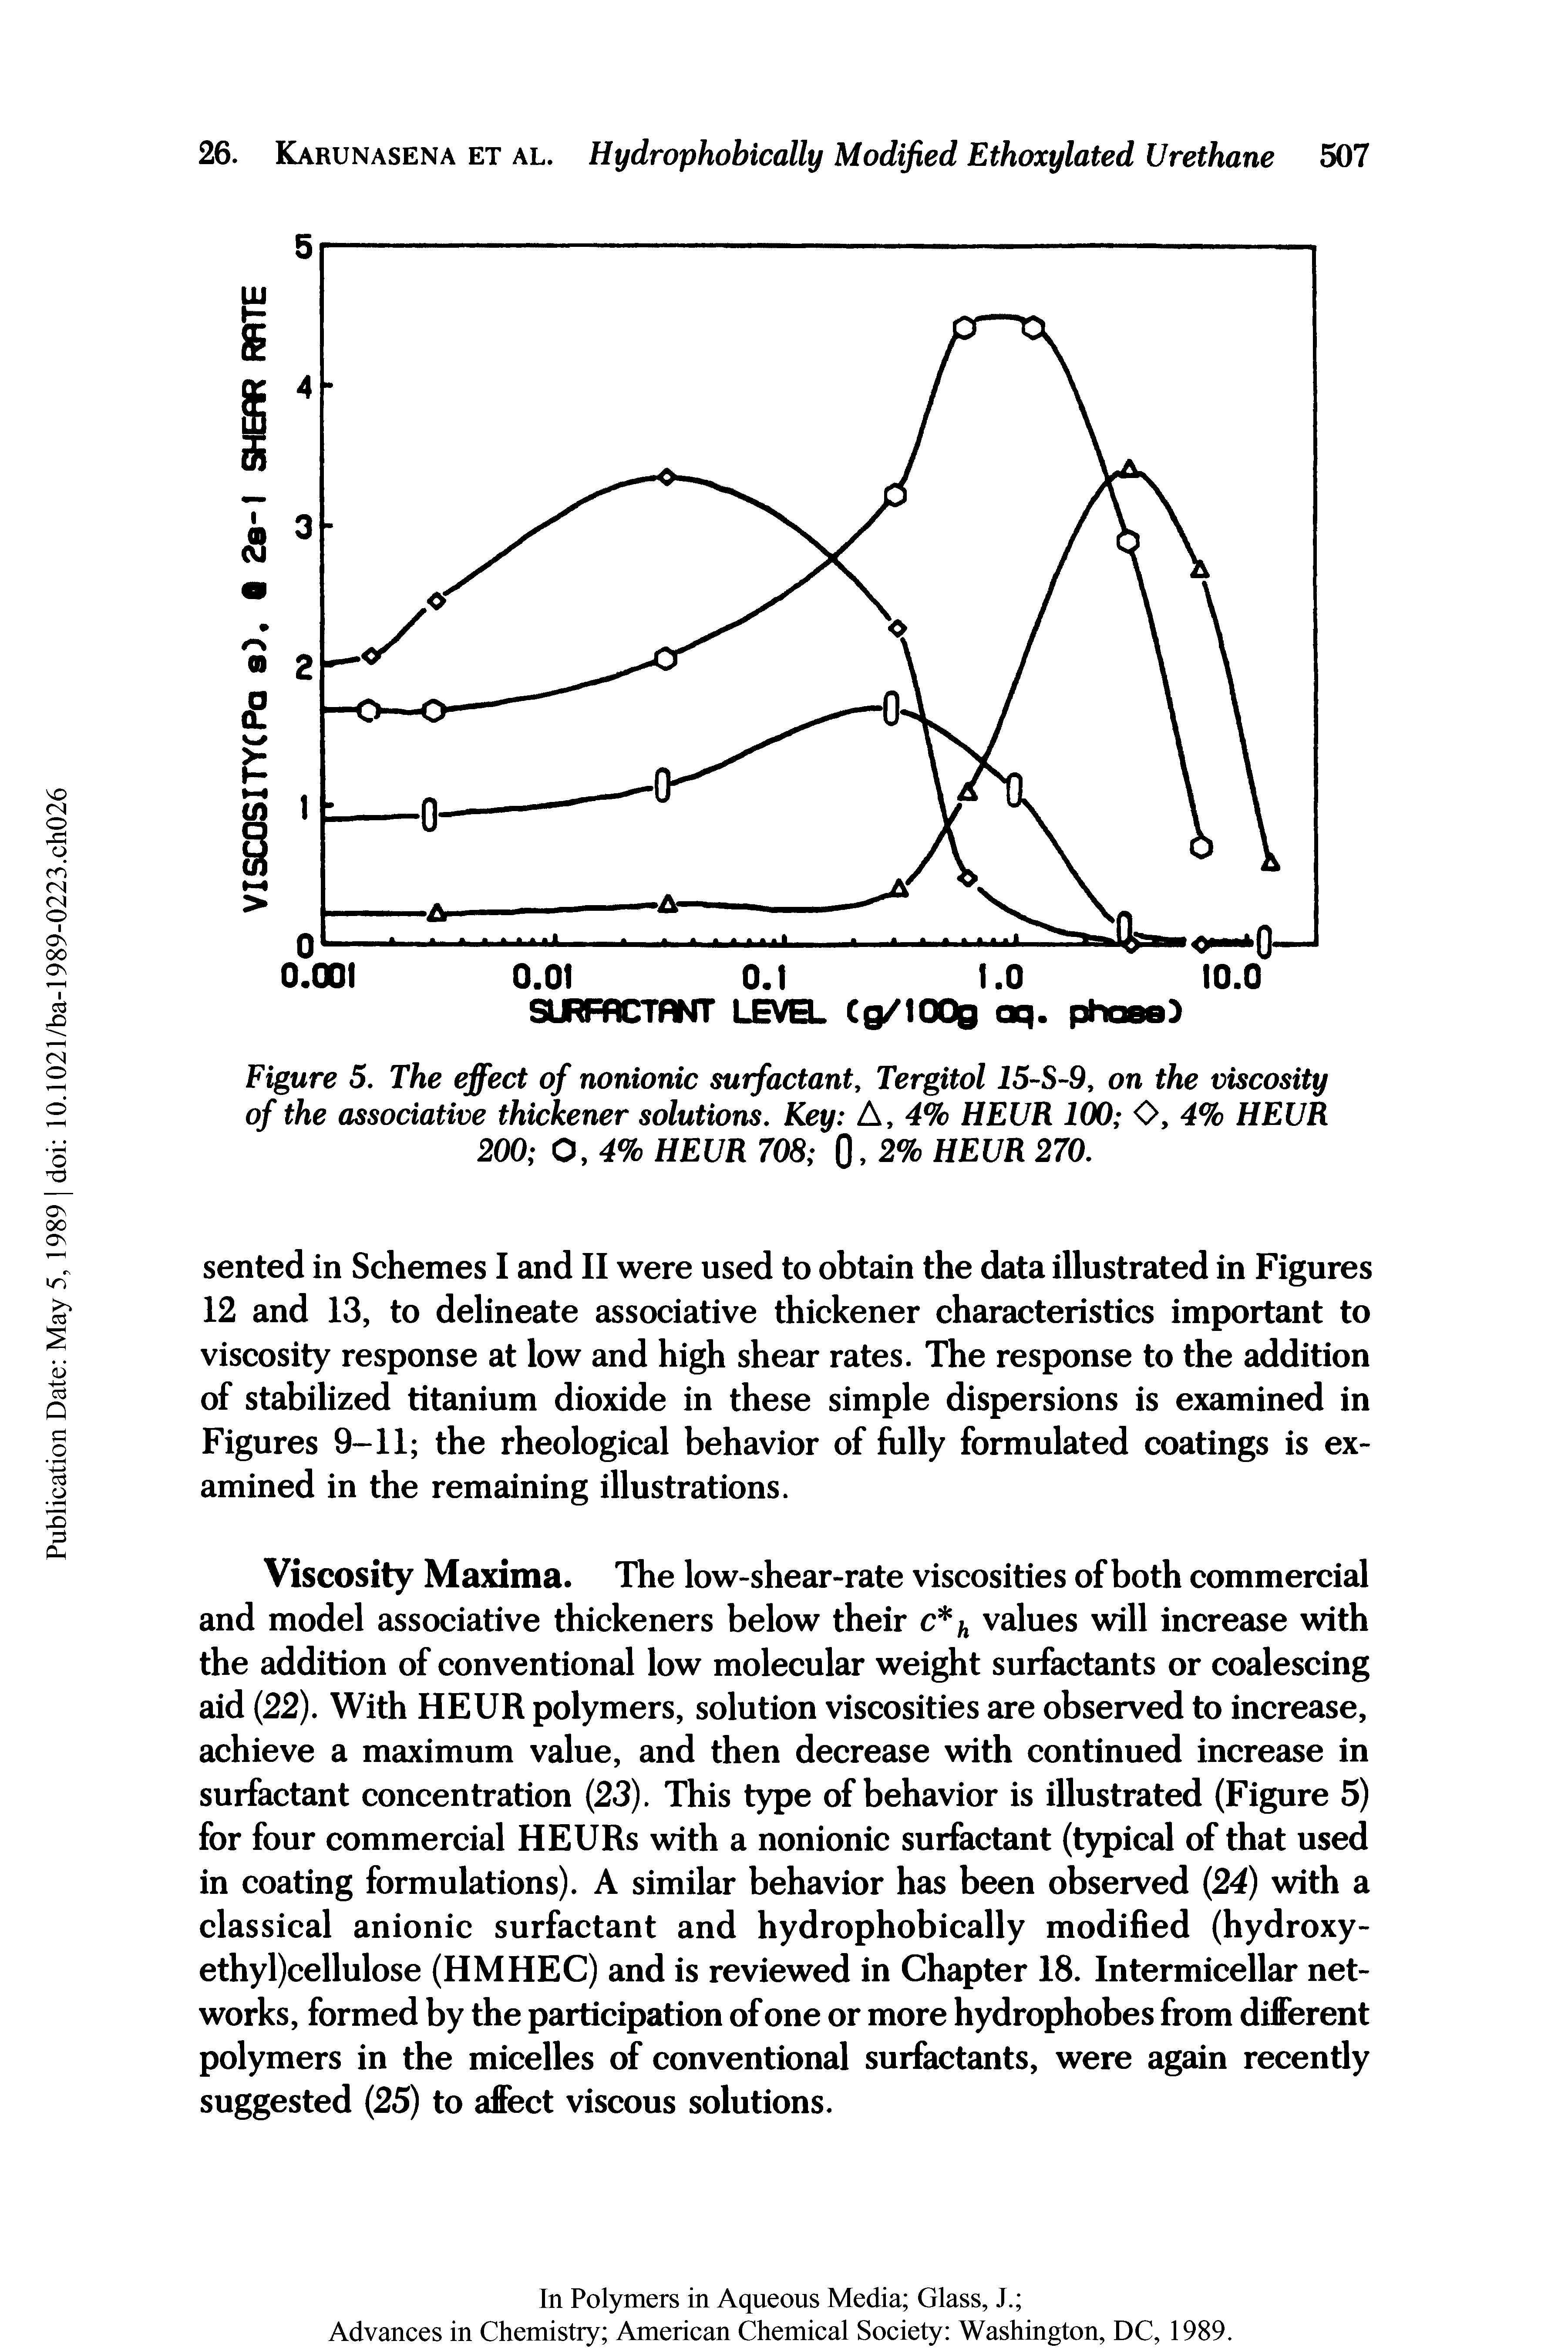 Figure 5. The effect of nonionic surfactant, Tergitol 15-S-9, on the viscosity of the associative thickener solutions. Key A, 4% HEUR 100 O, 4% HEUR 200 O, 4% HEUR 708 0, 2% HEUR 270.